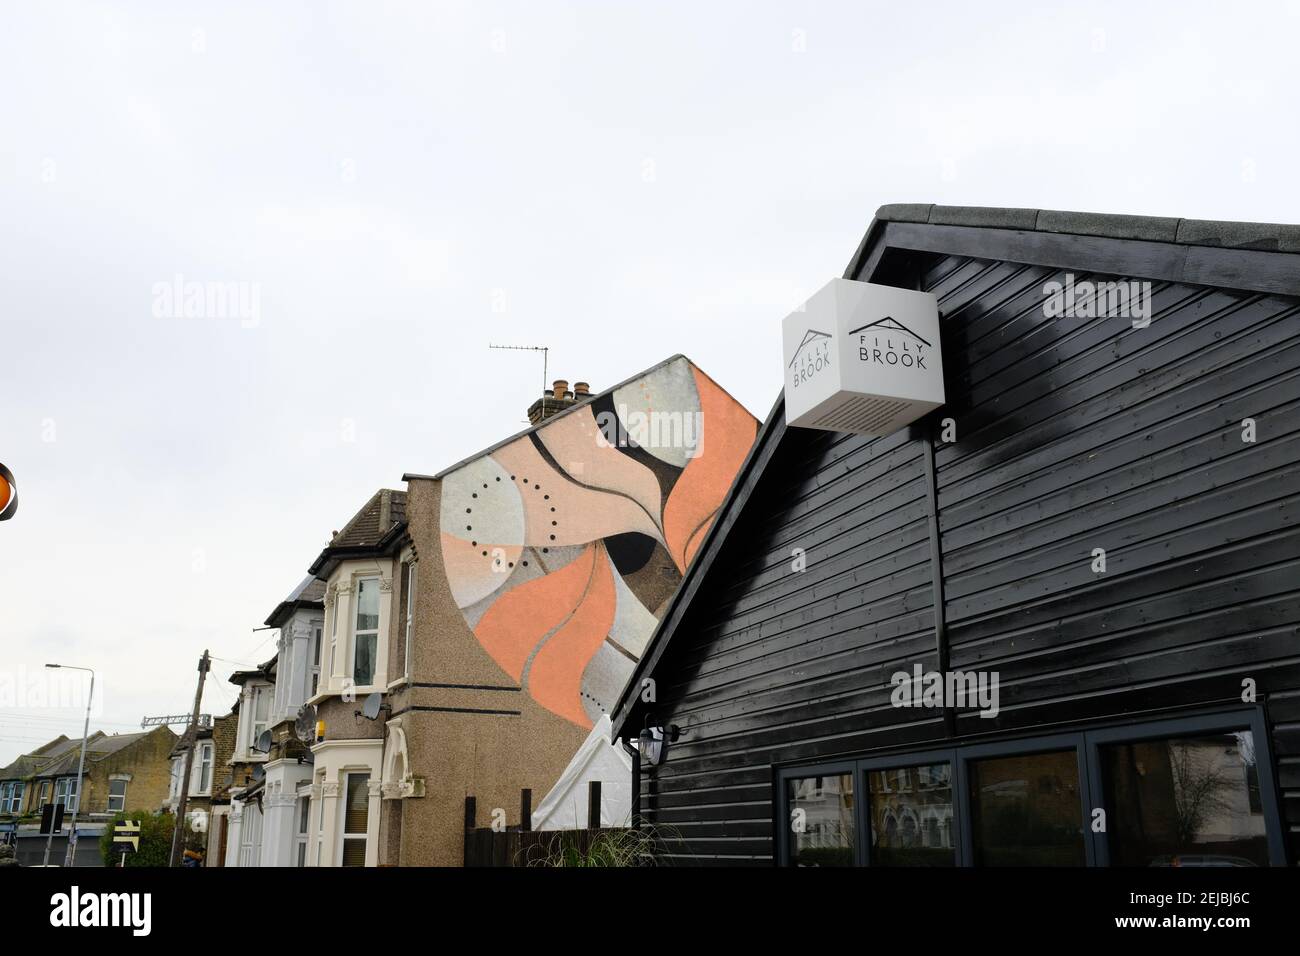 LEYTONSTONE, LONDON - 22ND FEBRUARY 2021: Filly Brook bar and restaurant in Leytonstone.  Painted mural by artist Lucy Mclauchlan. Stock Photo